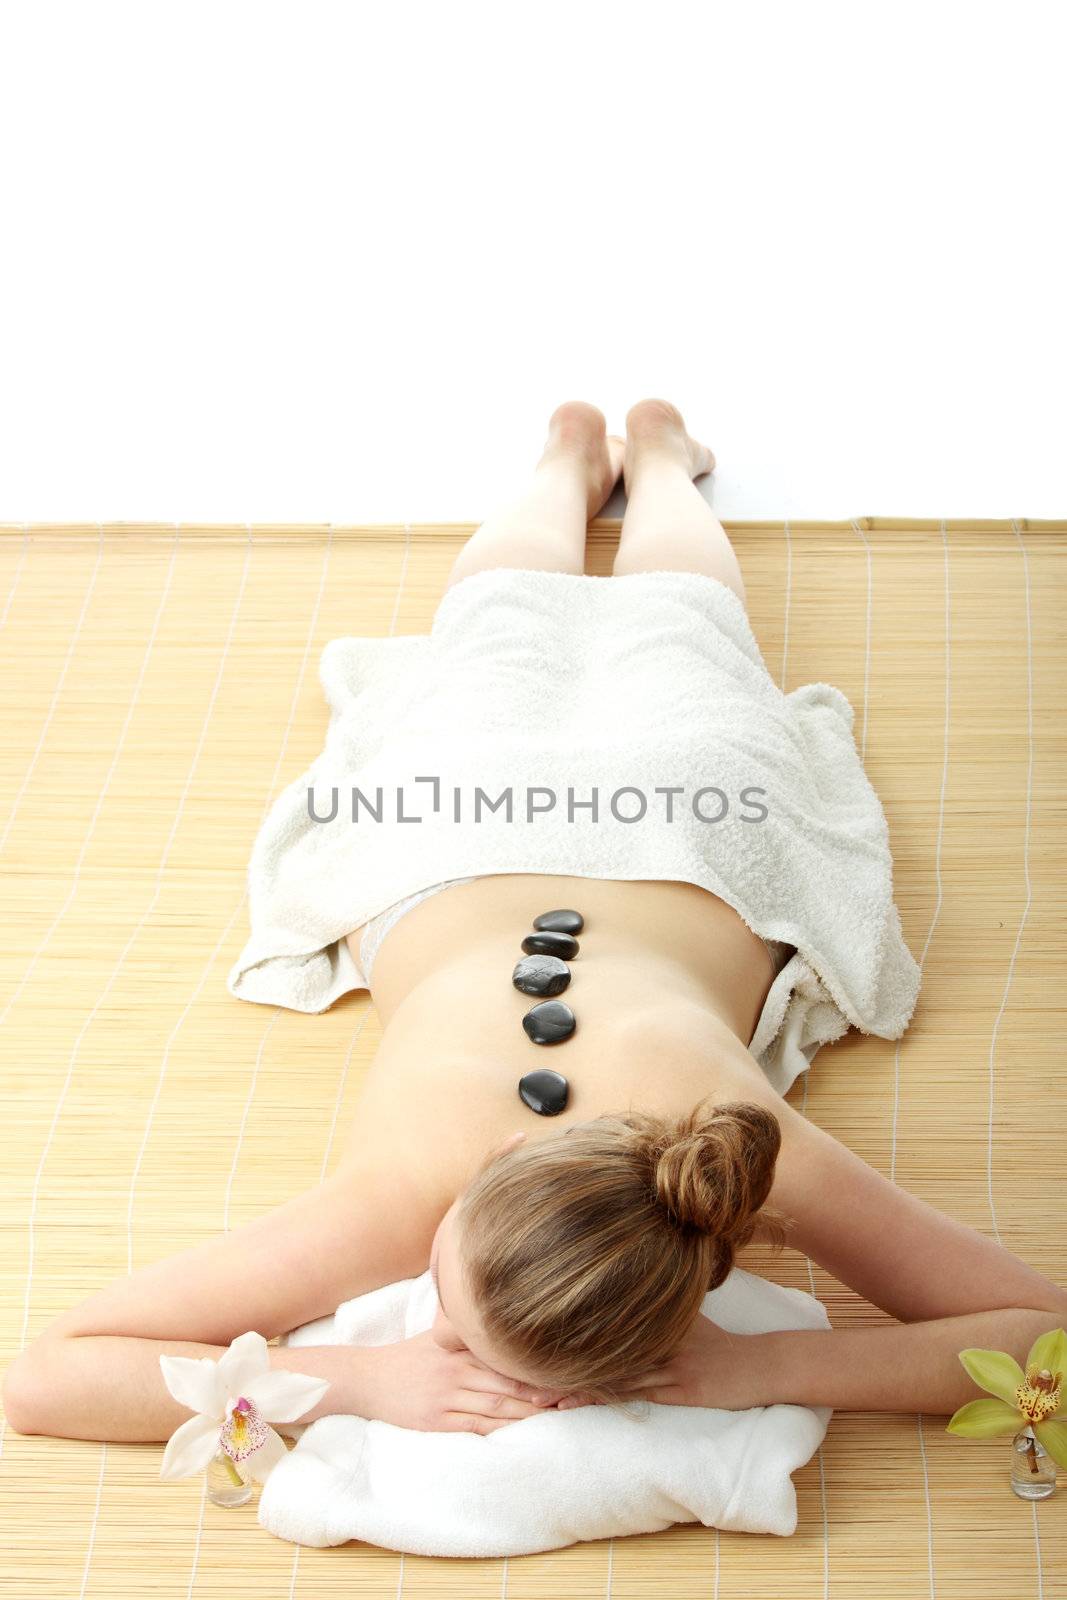 Attractive woman getting spa treatment isolated on white